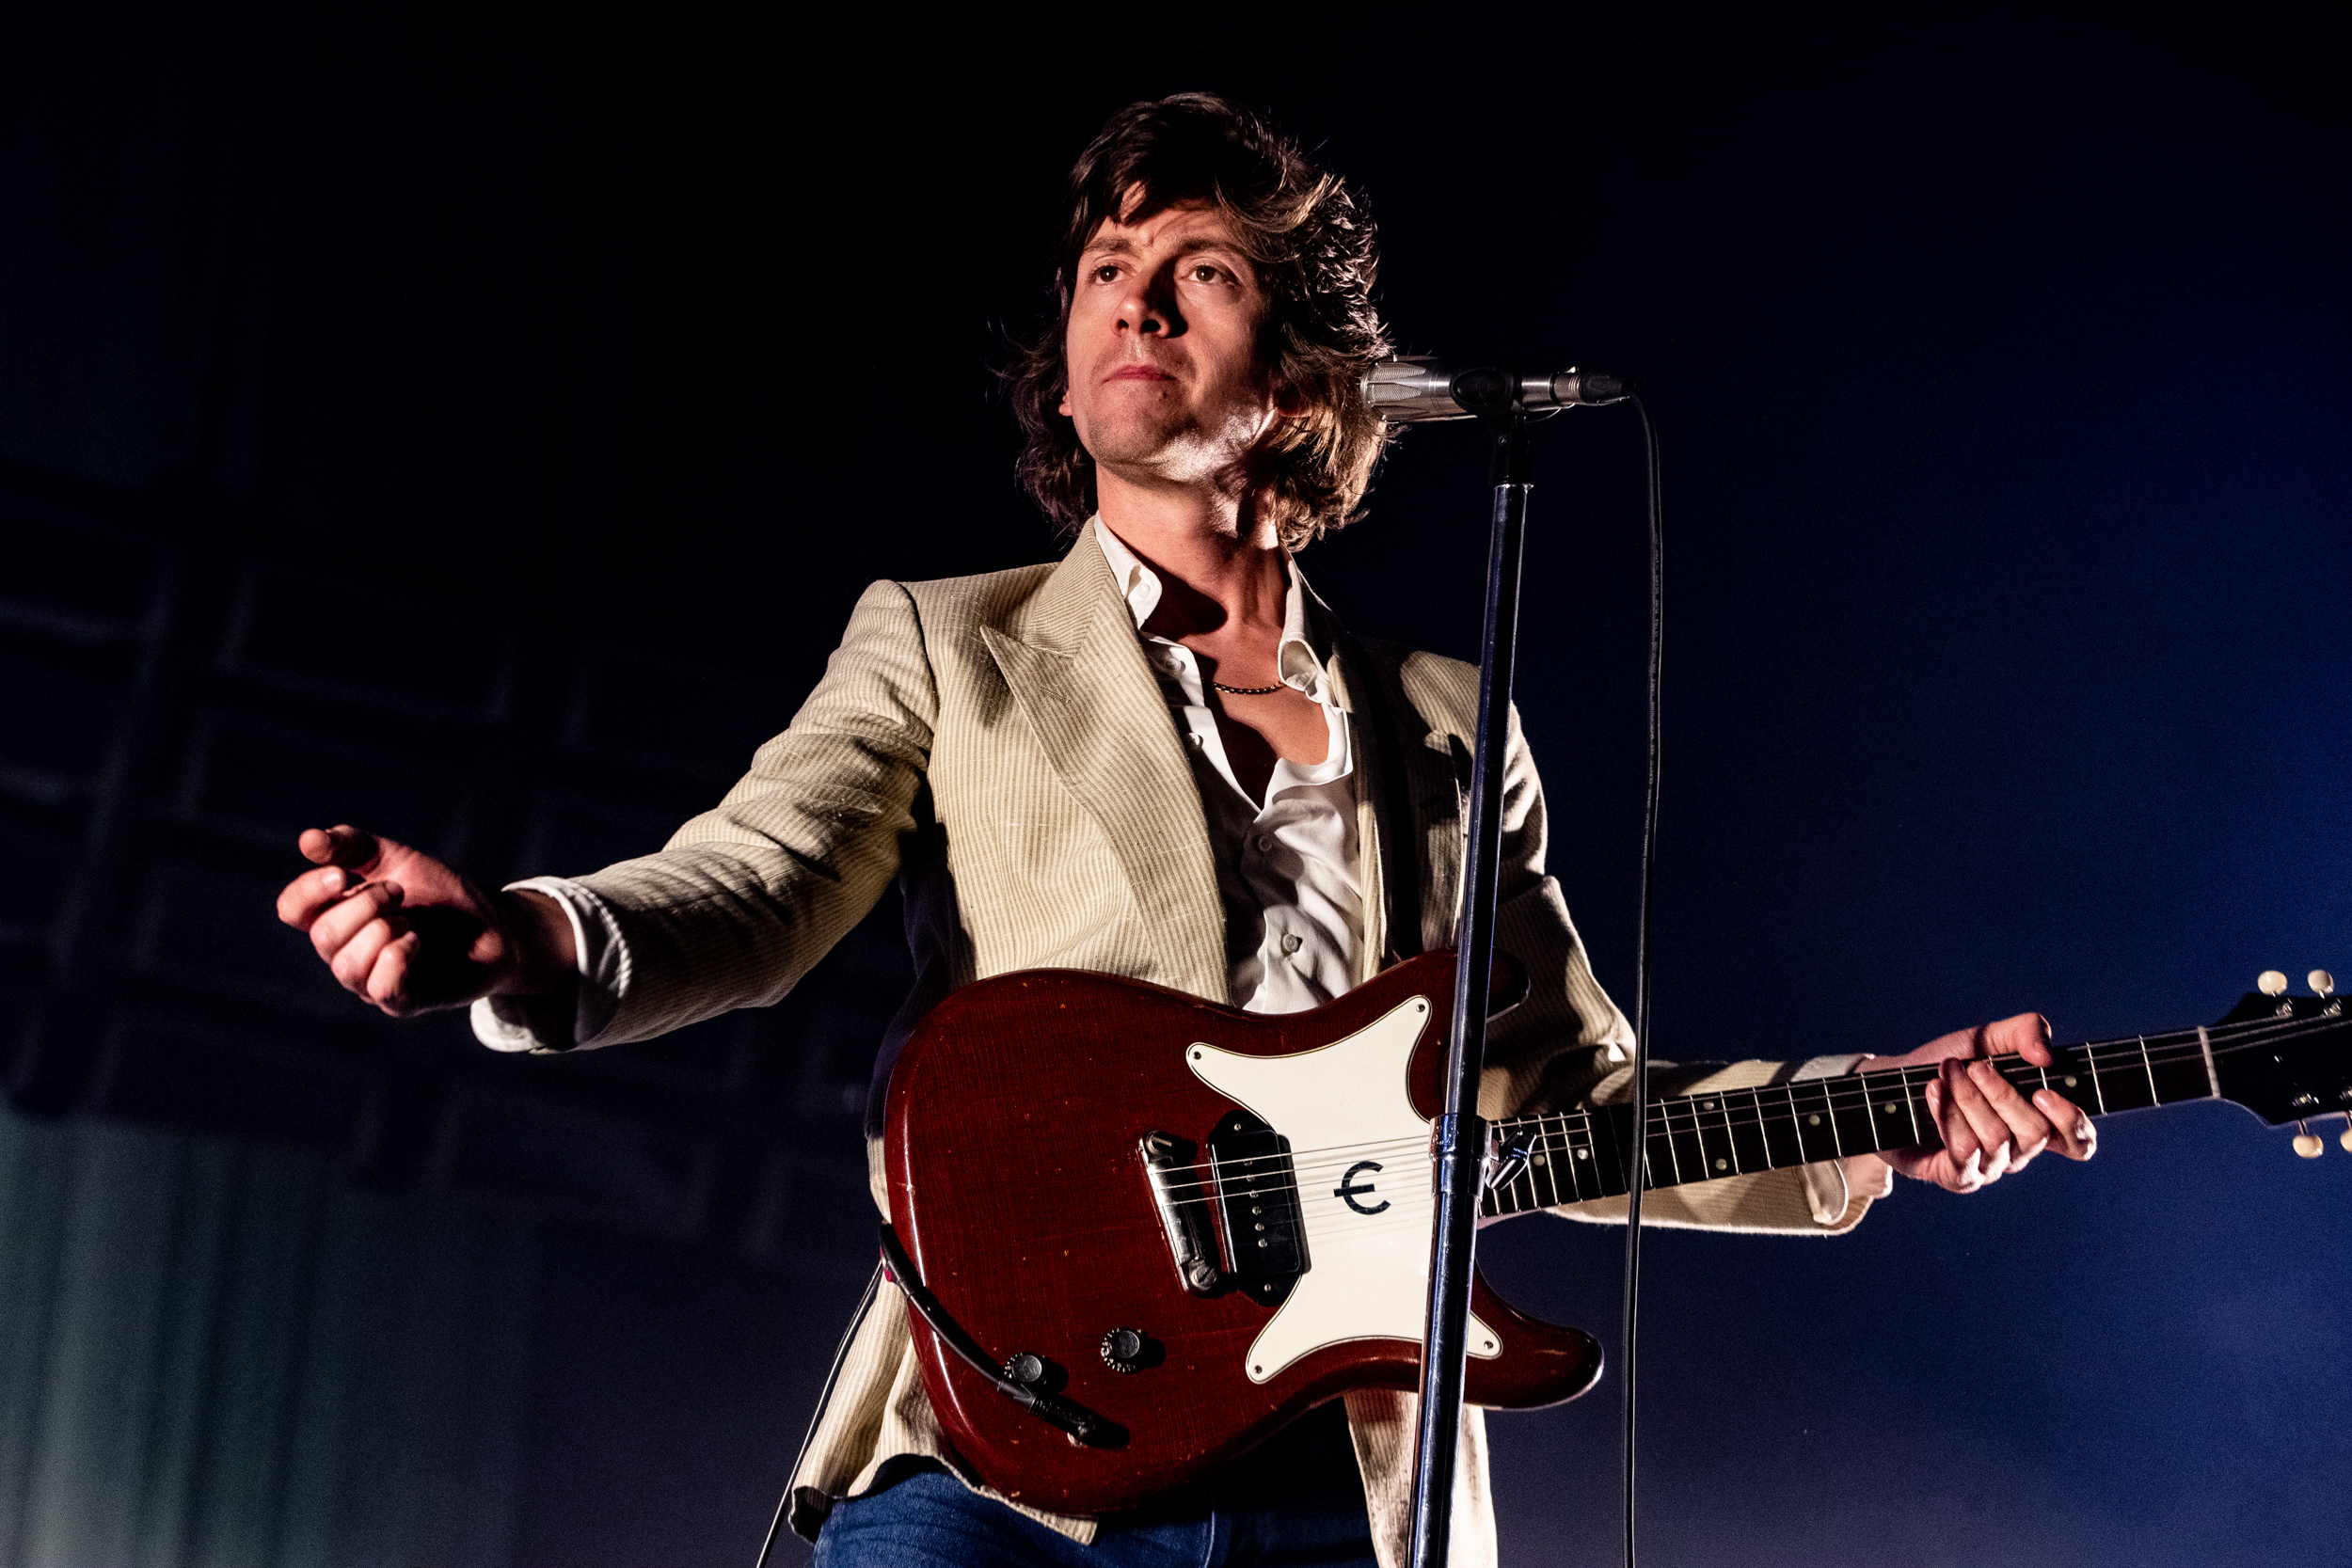 The Arctic Monkeys have had an excellent year